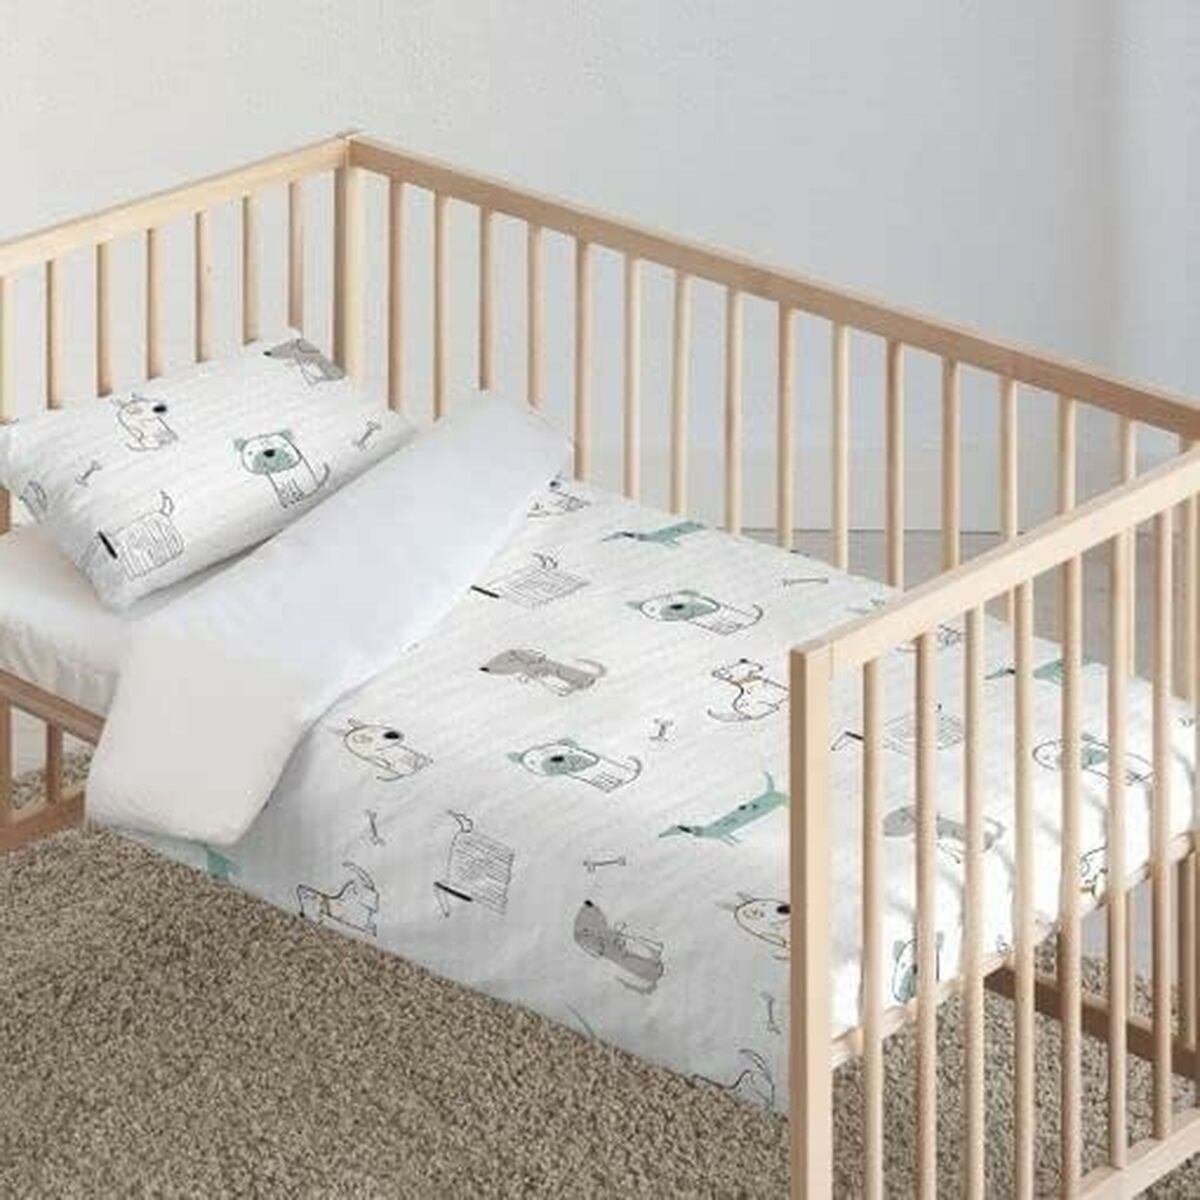 Cot Quilt Cover Kids&Cotton Huali Small 100 x 120 cm